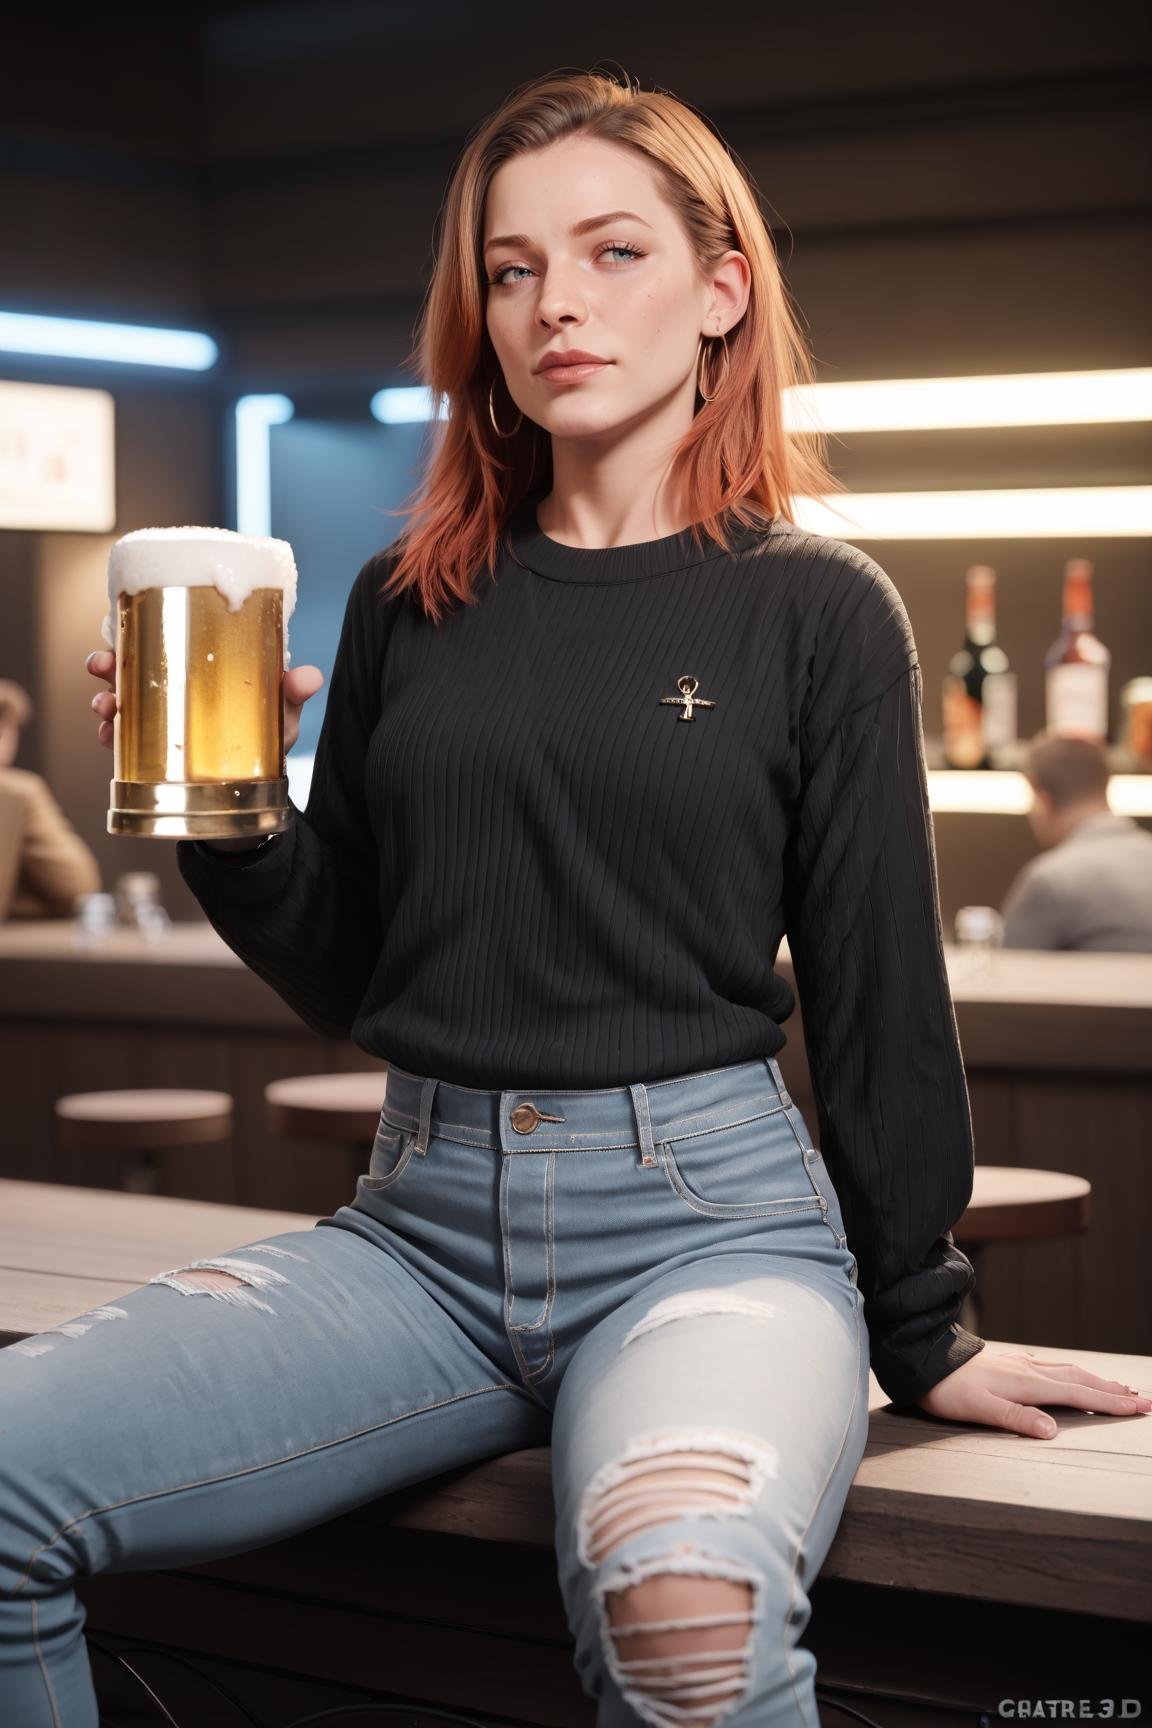 zPDXL2, zPDXLpg, zPDXLrl, ginger woman with red hair in luxurious nightclub, sitting at the bar holding a beer, wearing a sweater and jeans